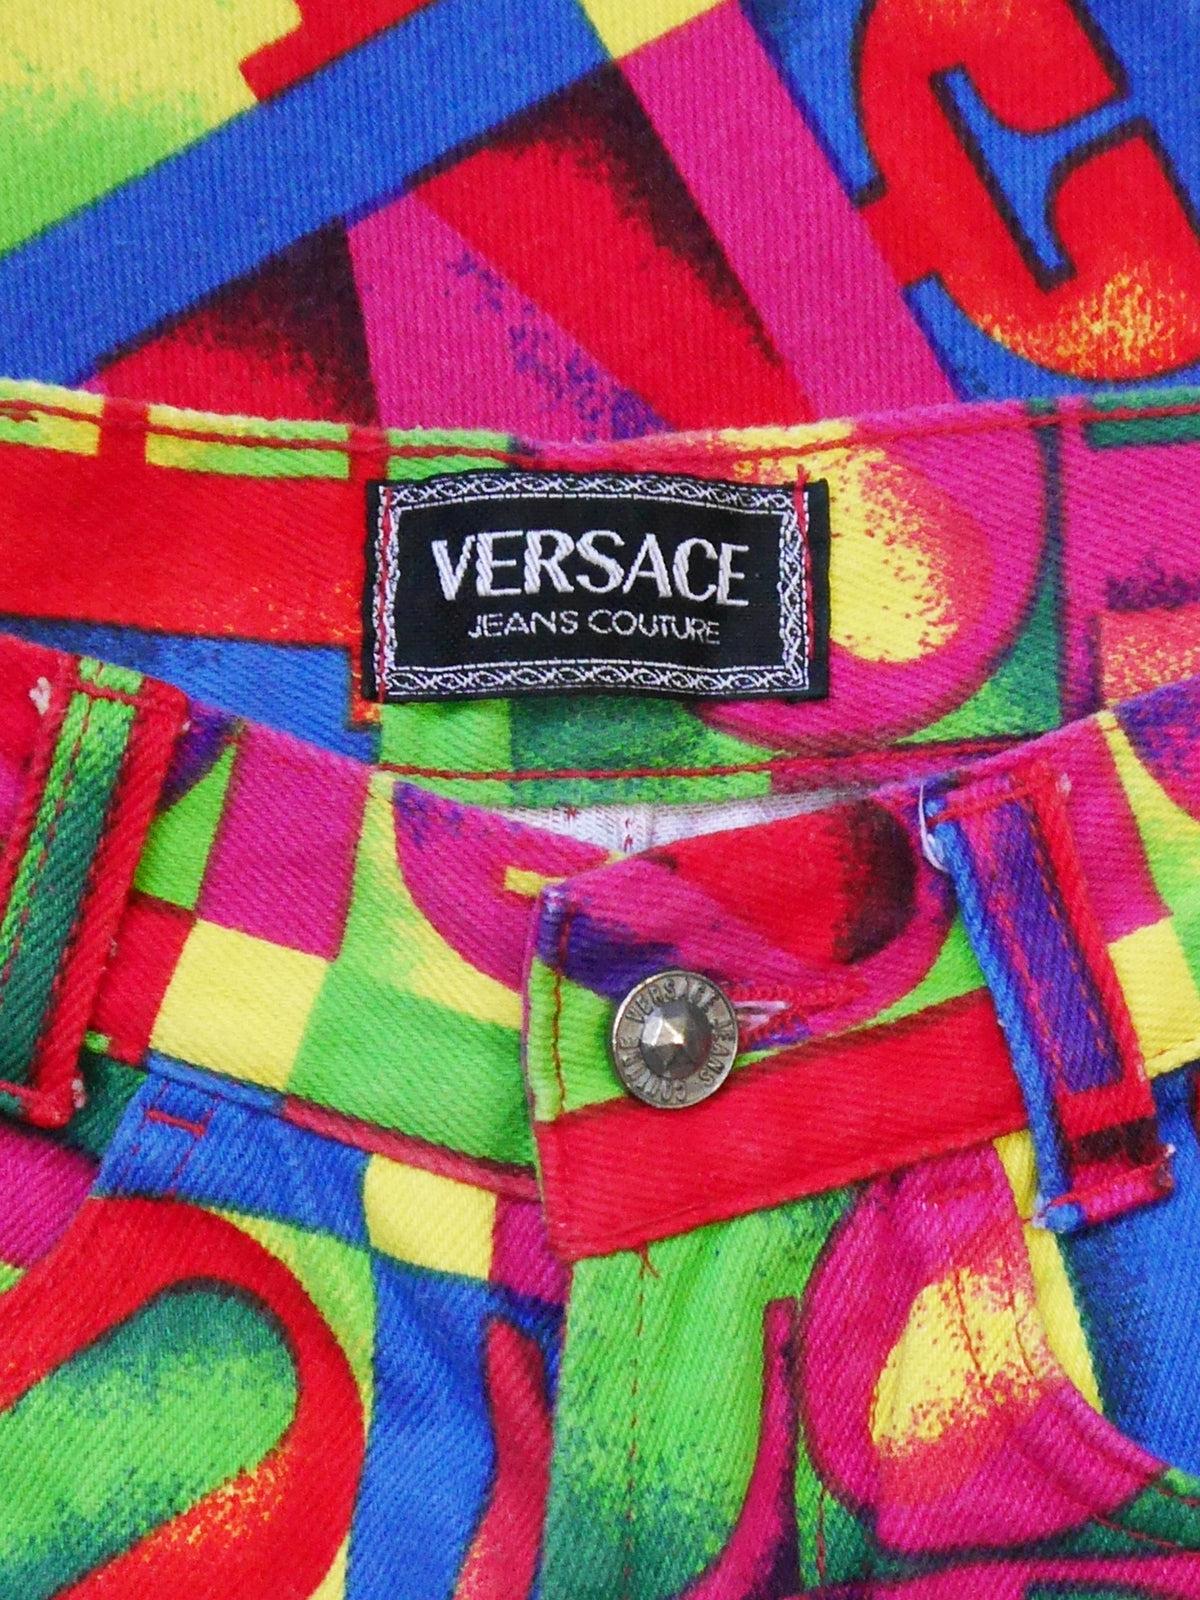 gianni versace jeans couture 1995 1990s vintage robert indiana love denim pants 2